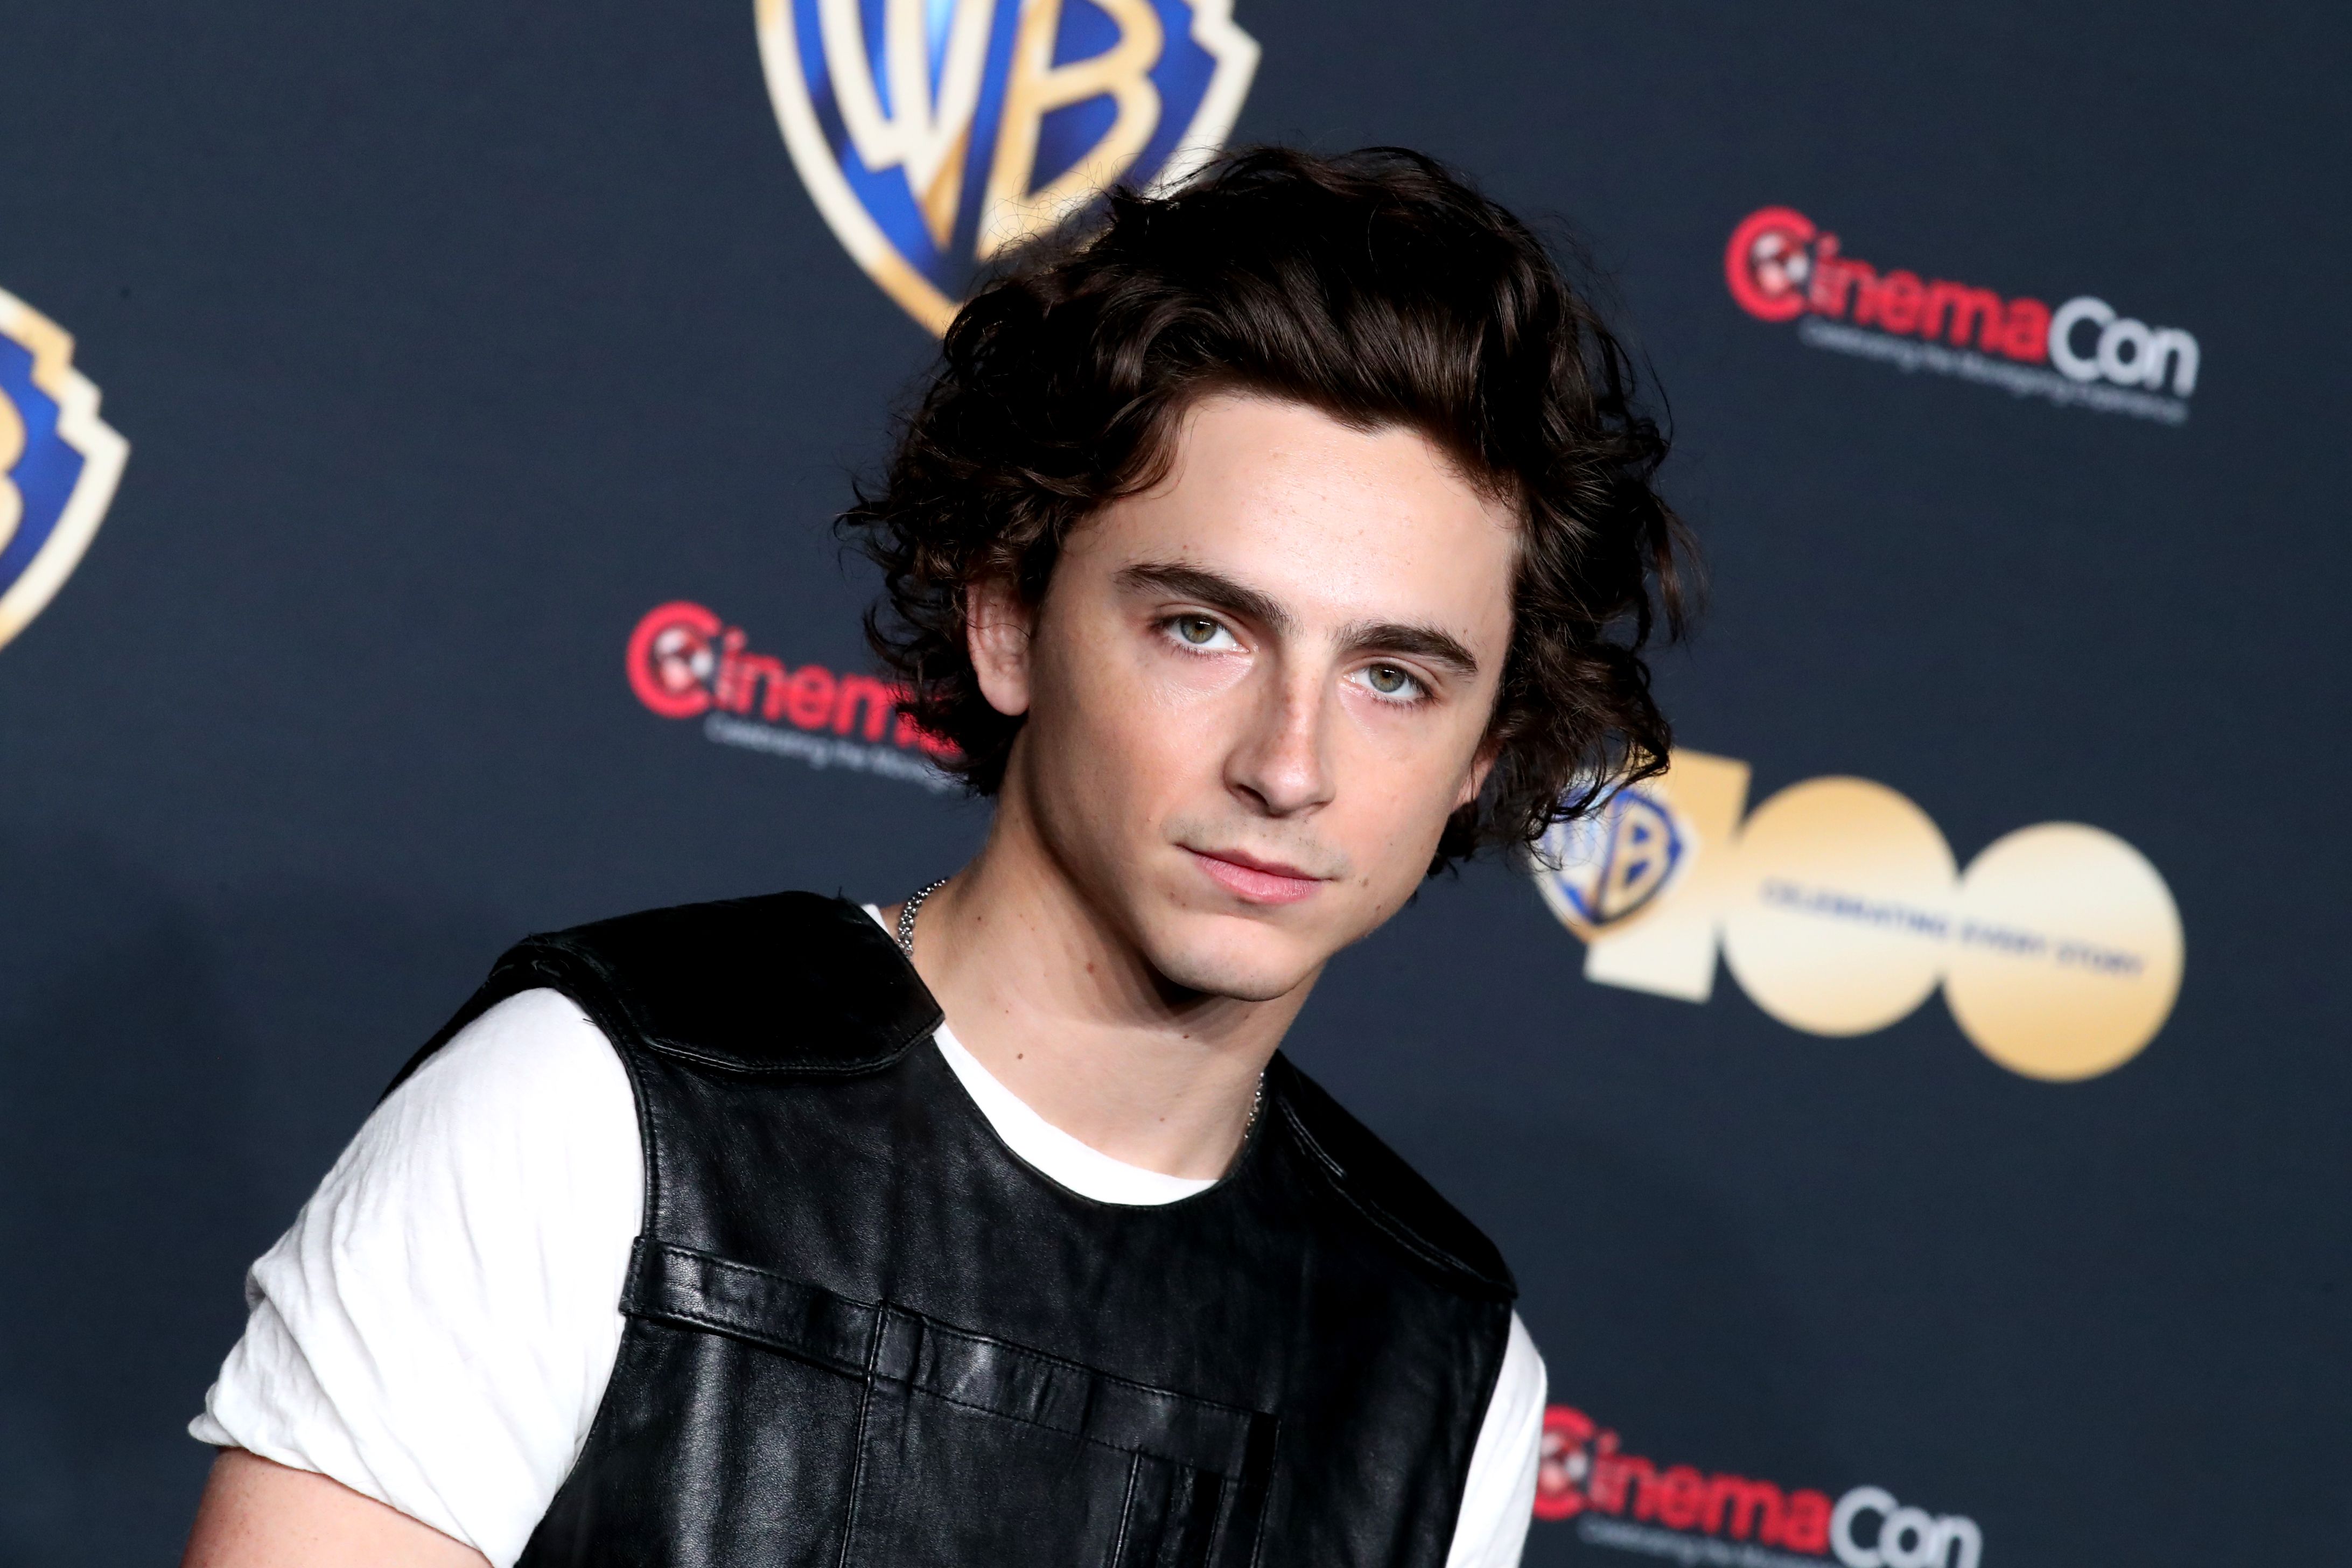 Timothee Chalamet Broadway Rumors Explained: Fan Speculation